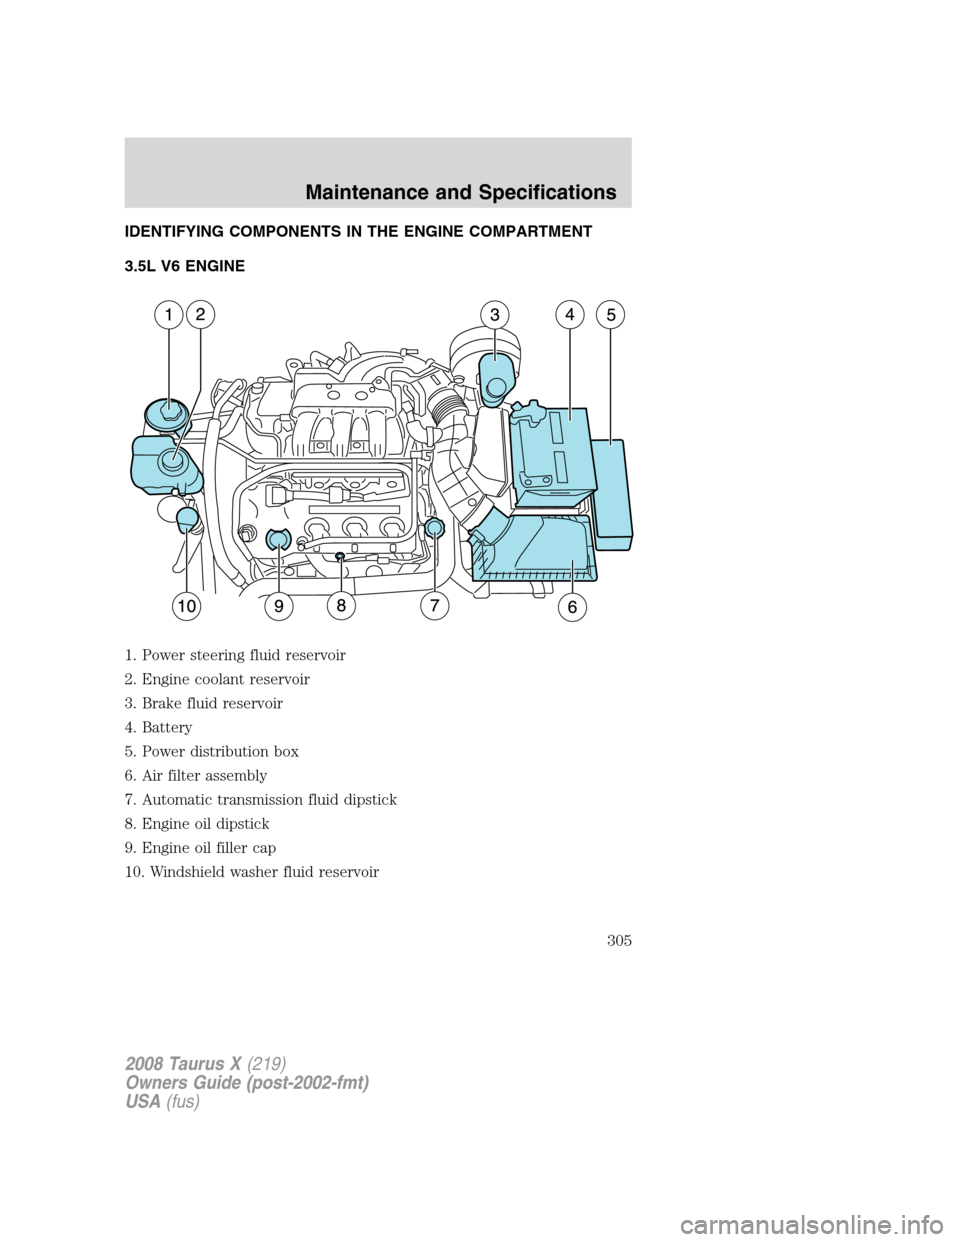 FORD TAURUS X 2008 1.G Owners Manual IDENTIFYING COMPONENTS IN THE ENGINE COMPARTMENT
3.5L V6 ENGINE
1. Power steering fluid reservoir
2. Engine coolant reservoir
3. Brake fluid reservoir
4. Battery
5. Power distribution box
6. Air filte